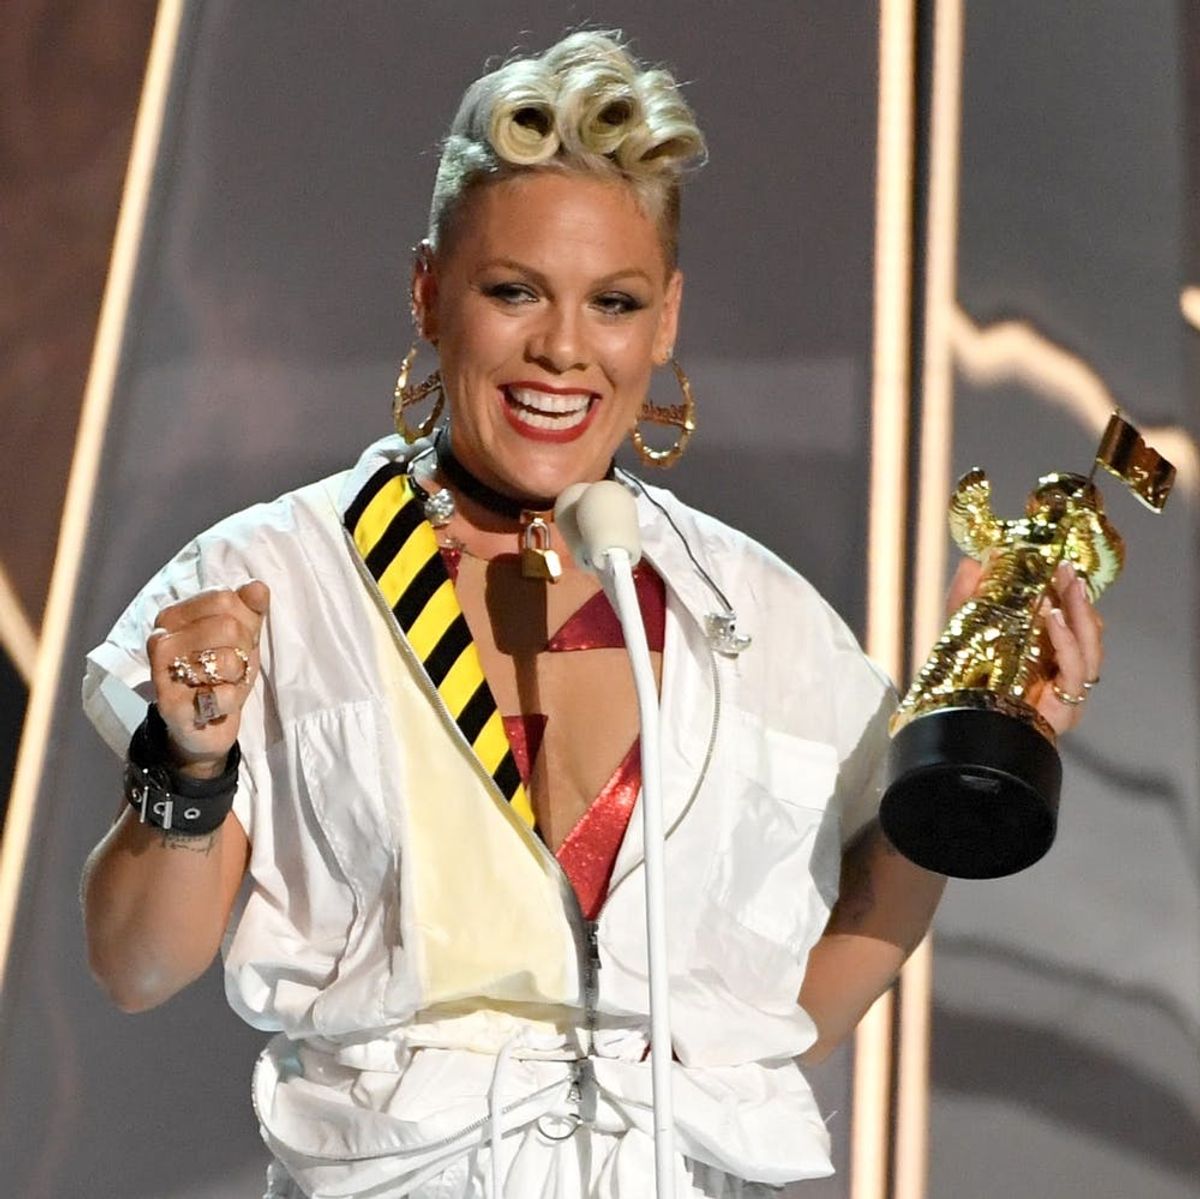 Parents and Advocacy Groups Won’t Stop Applauding Pink’s Powerful VMAs Speech